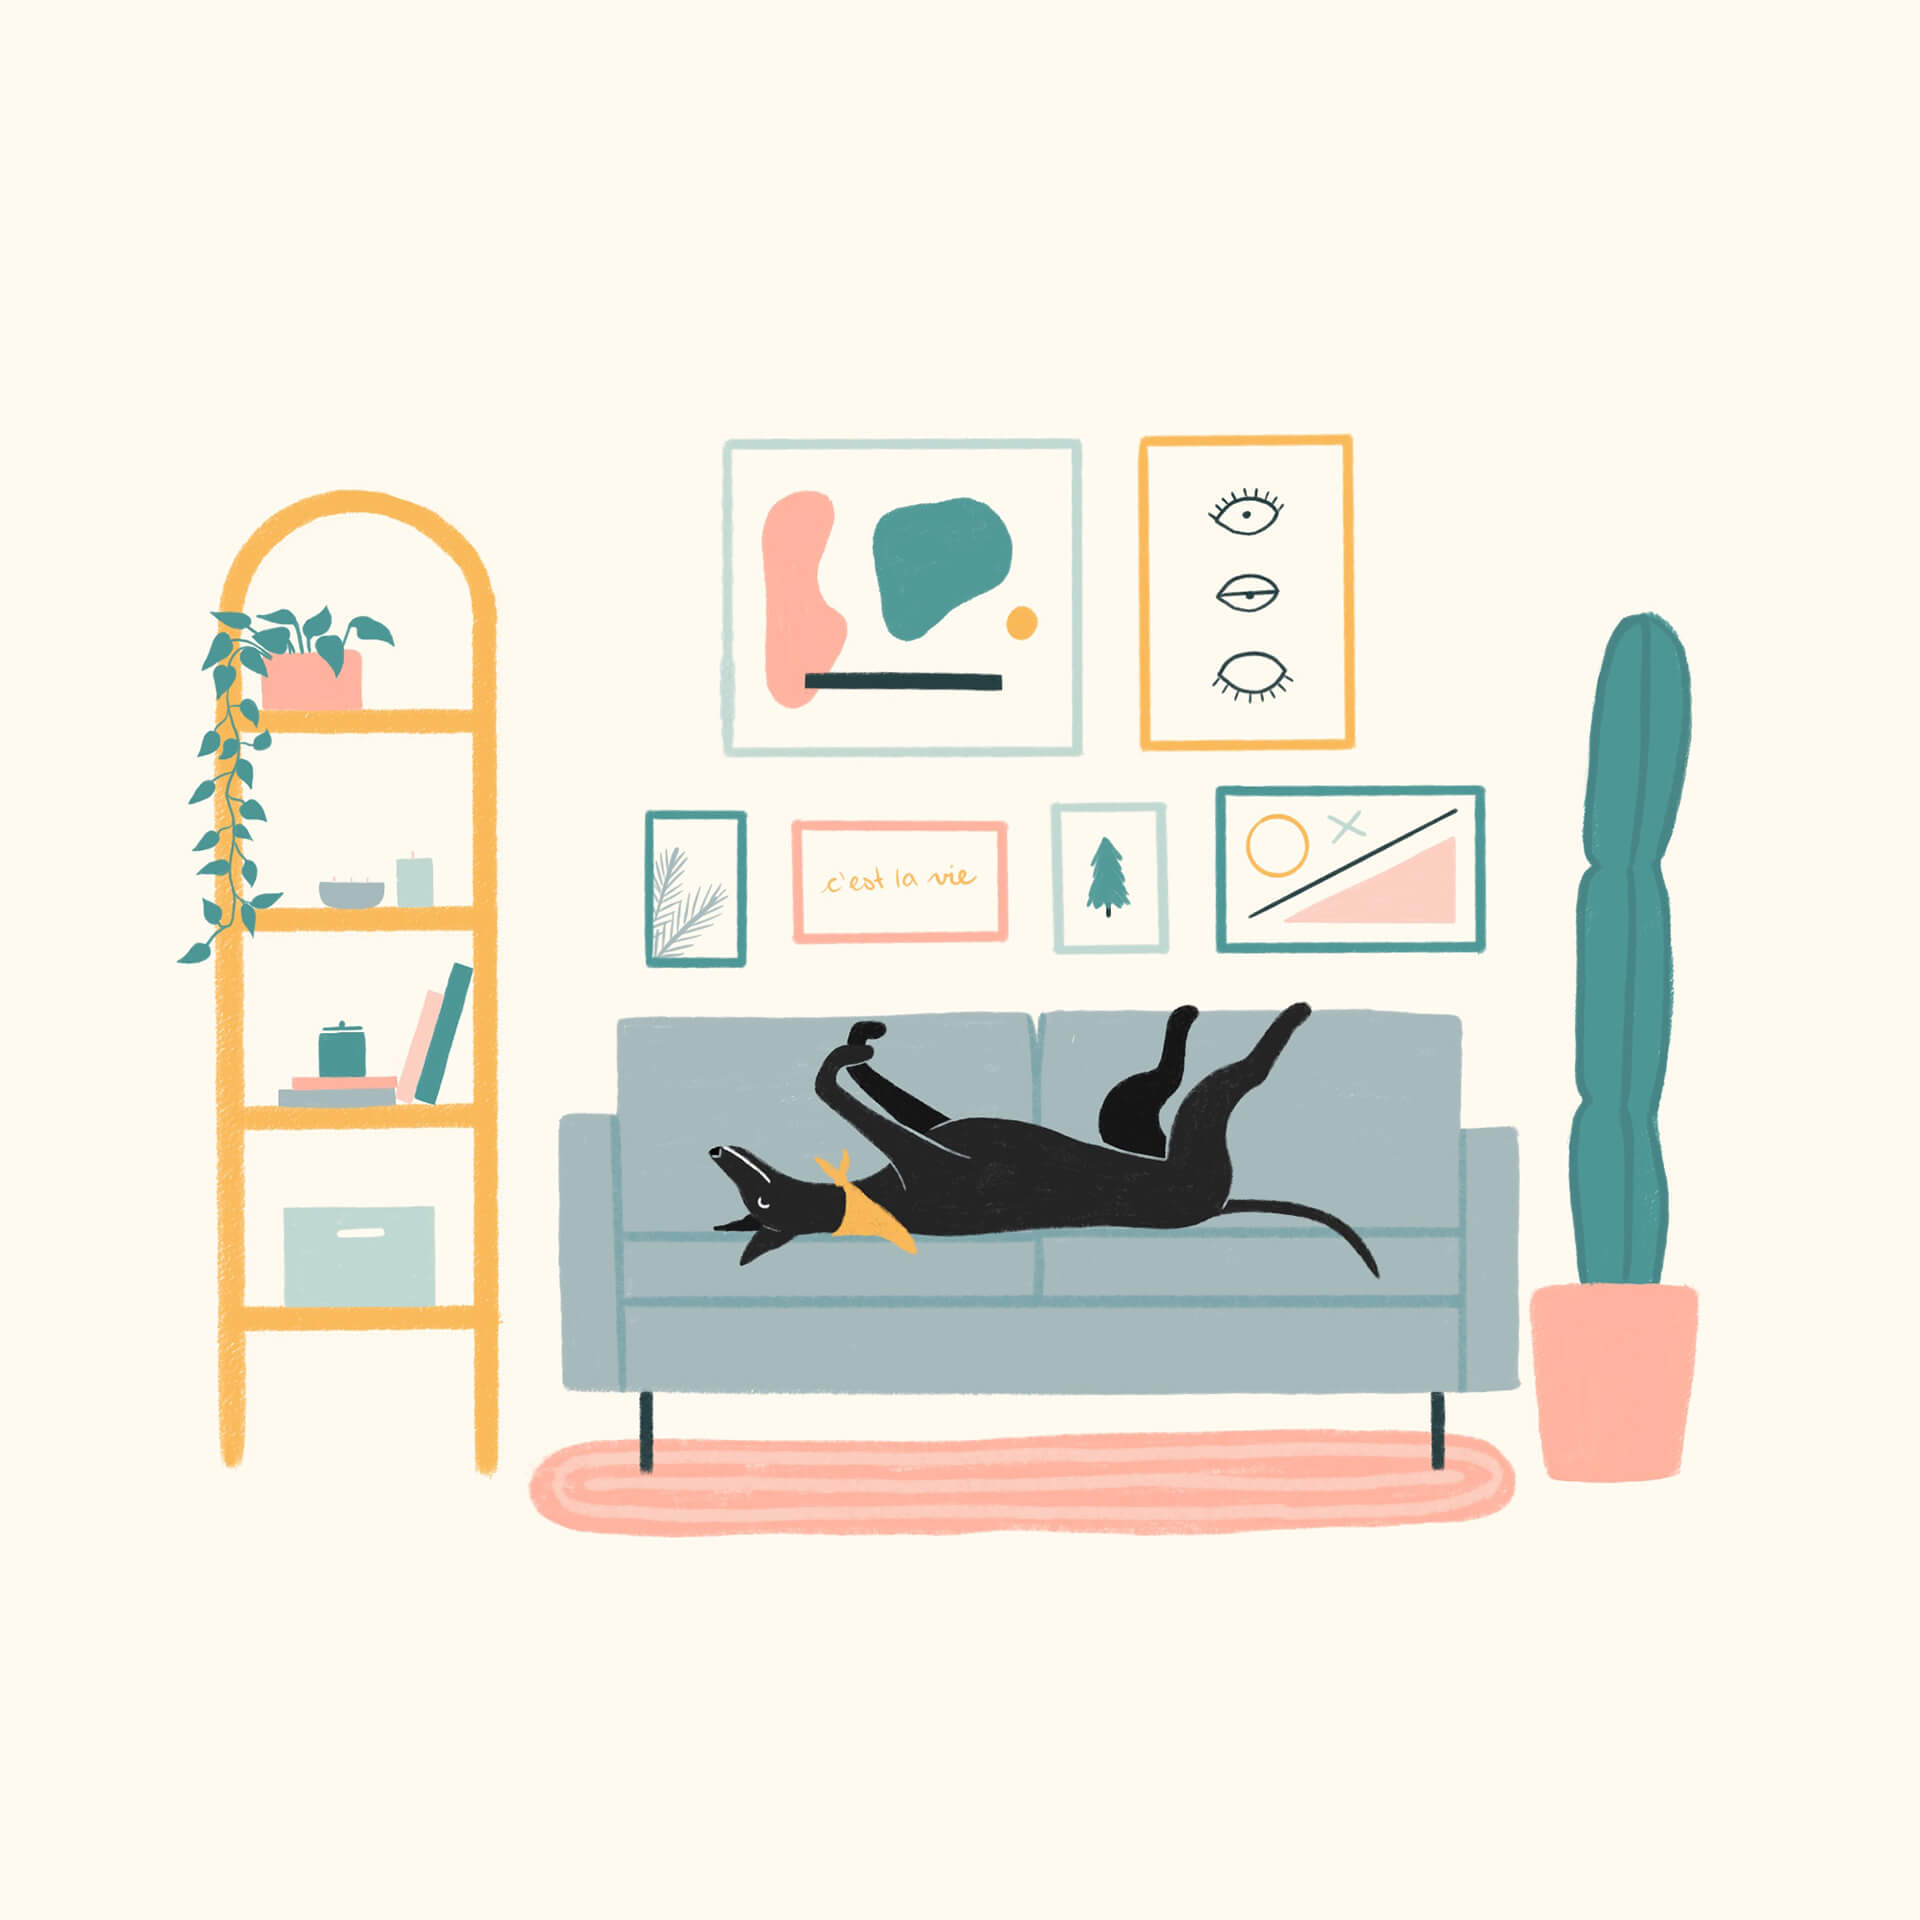 Illustration of a black greyhound in a living room